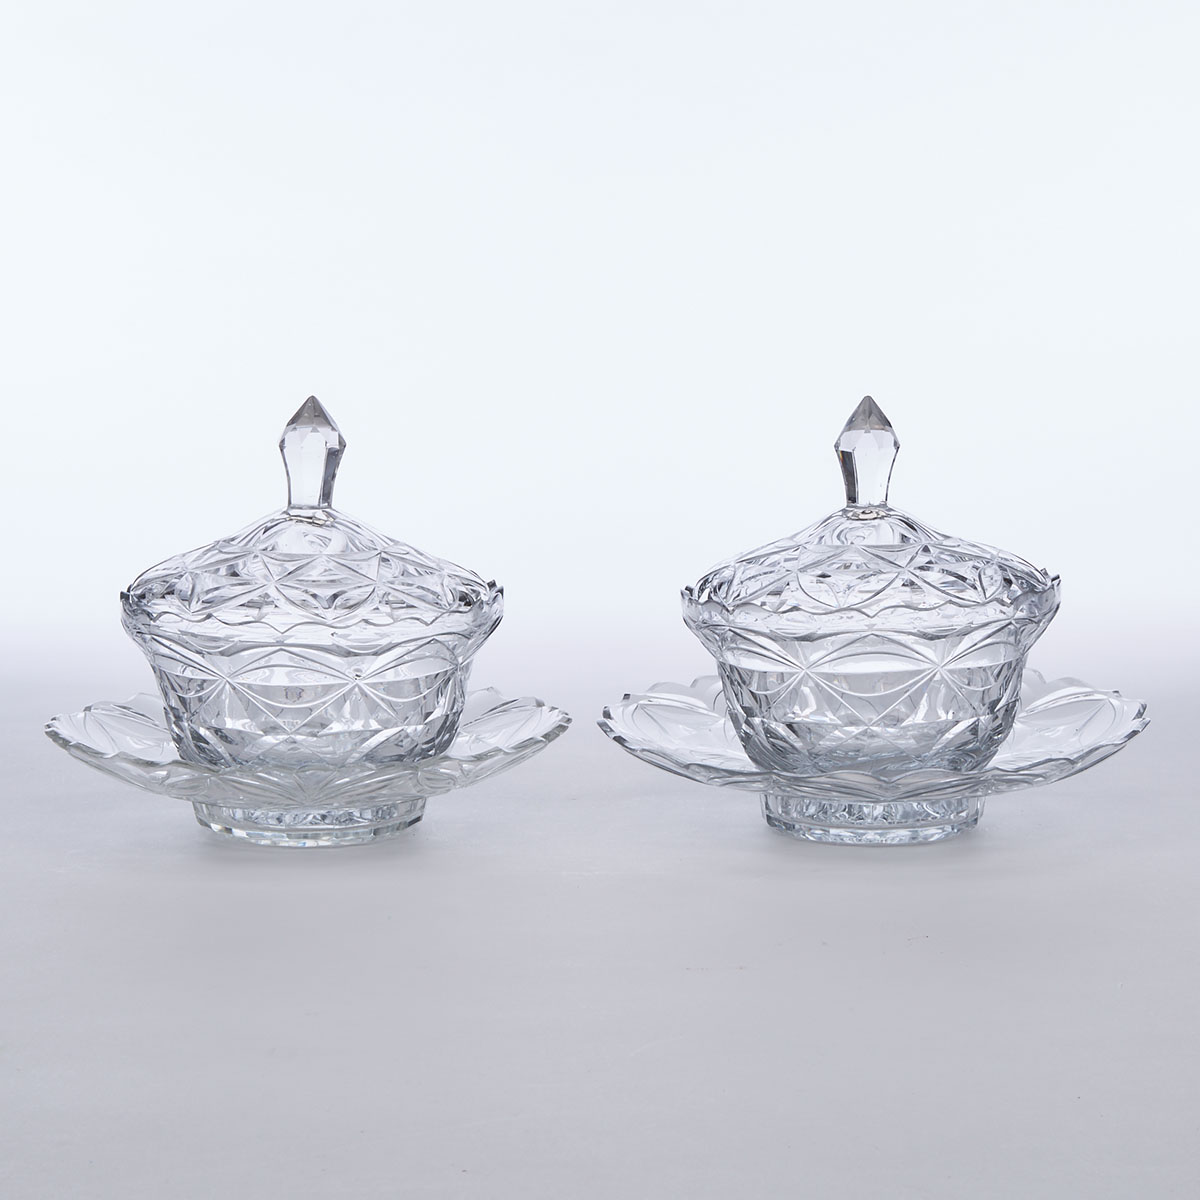 Pair of Continental Cut Glass Bowls with Covers and Stands, late 19th/early 20th century